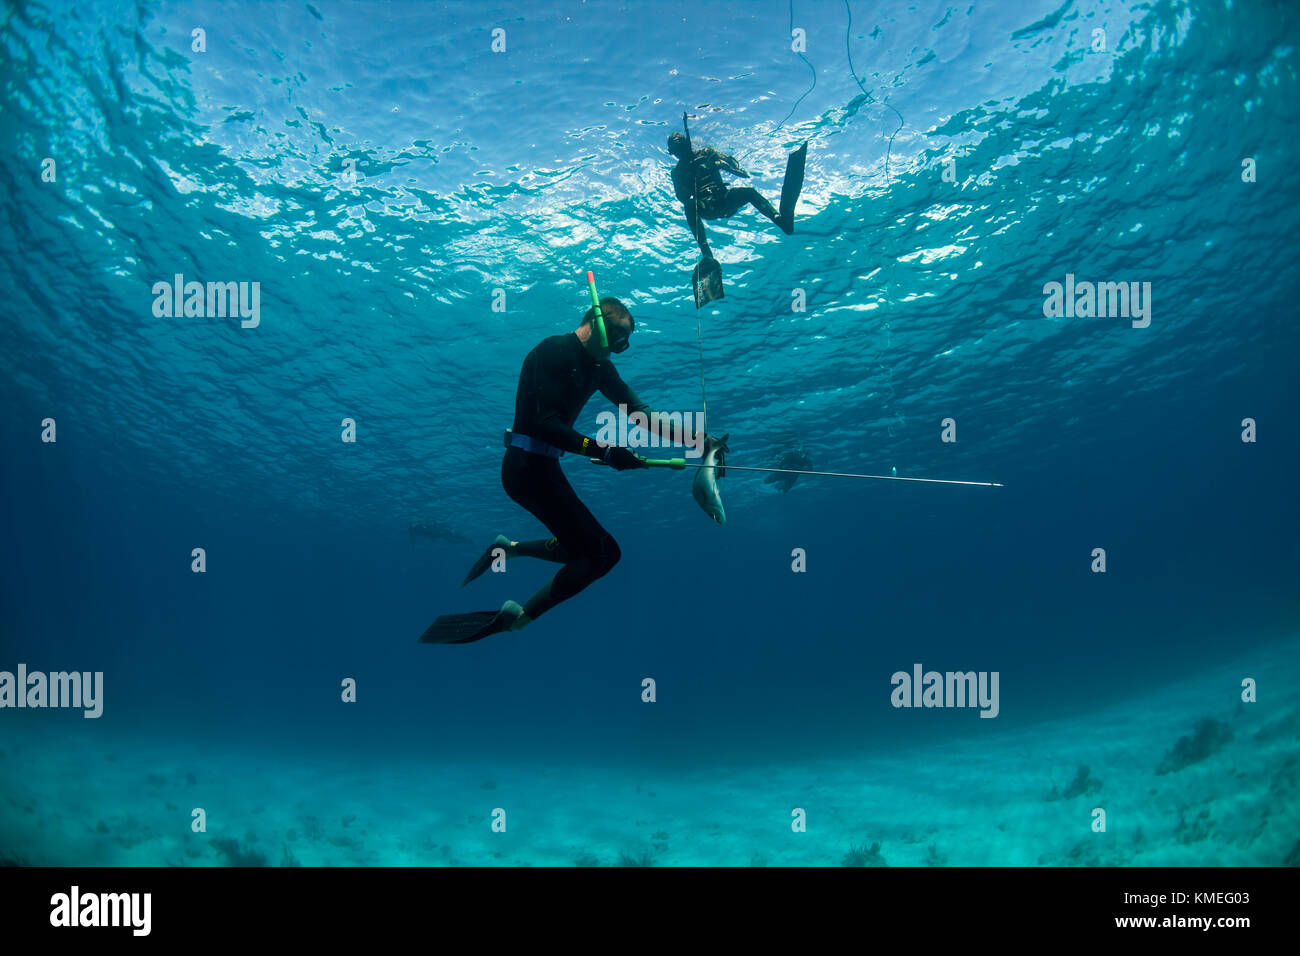 Two divers retrieving dead margate fish (of grunt family) while spearfishing. Sharks can be attracted by the dying fish, so divers often help each other and keep eyes out for other predators, Clarence Town, Long Island, Bahamas. Stock Photo